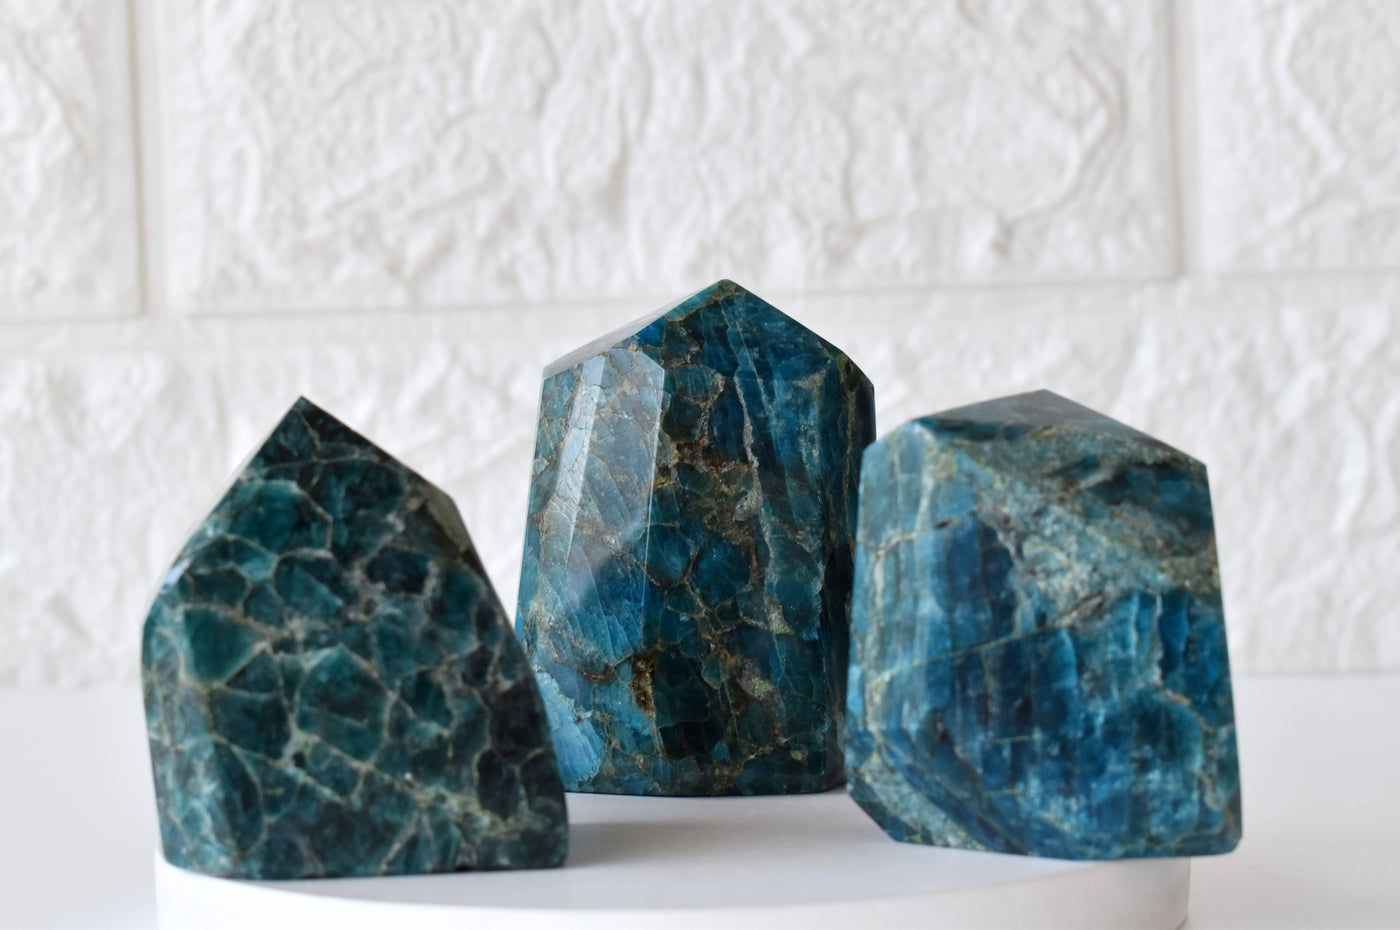 Polished Blue Apatite Points (Inspiration and Psychic Abilities)